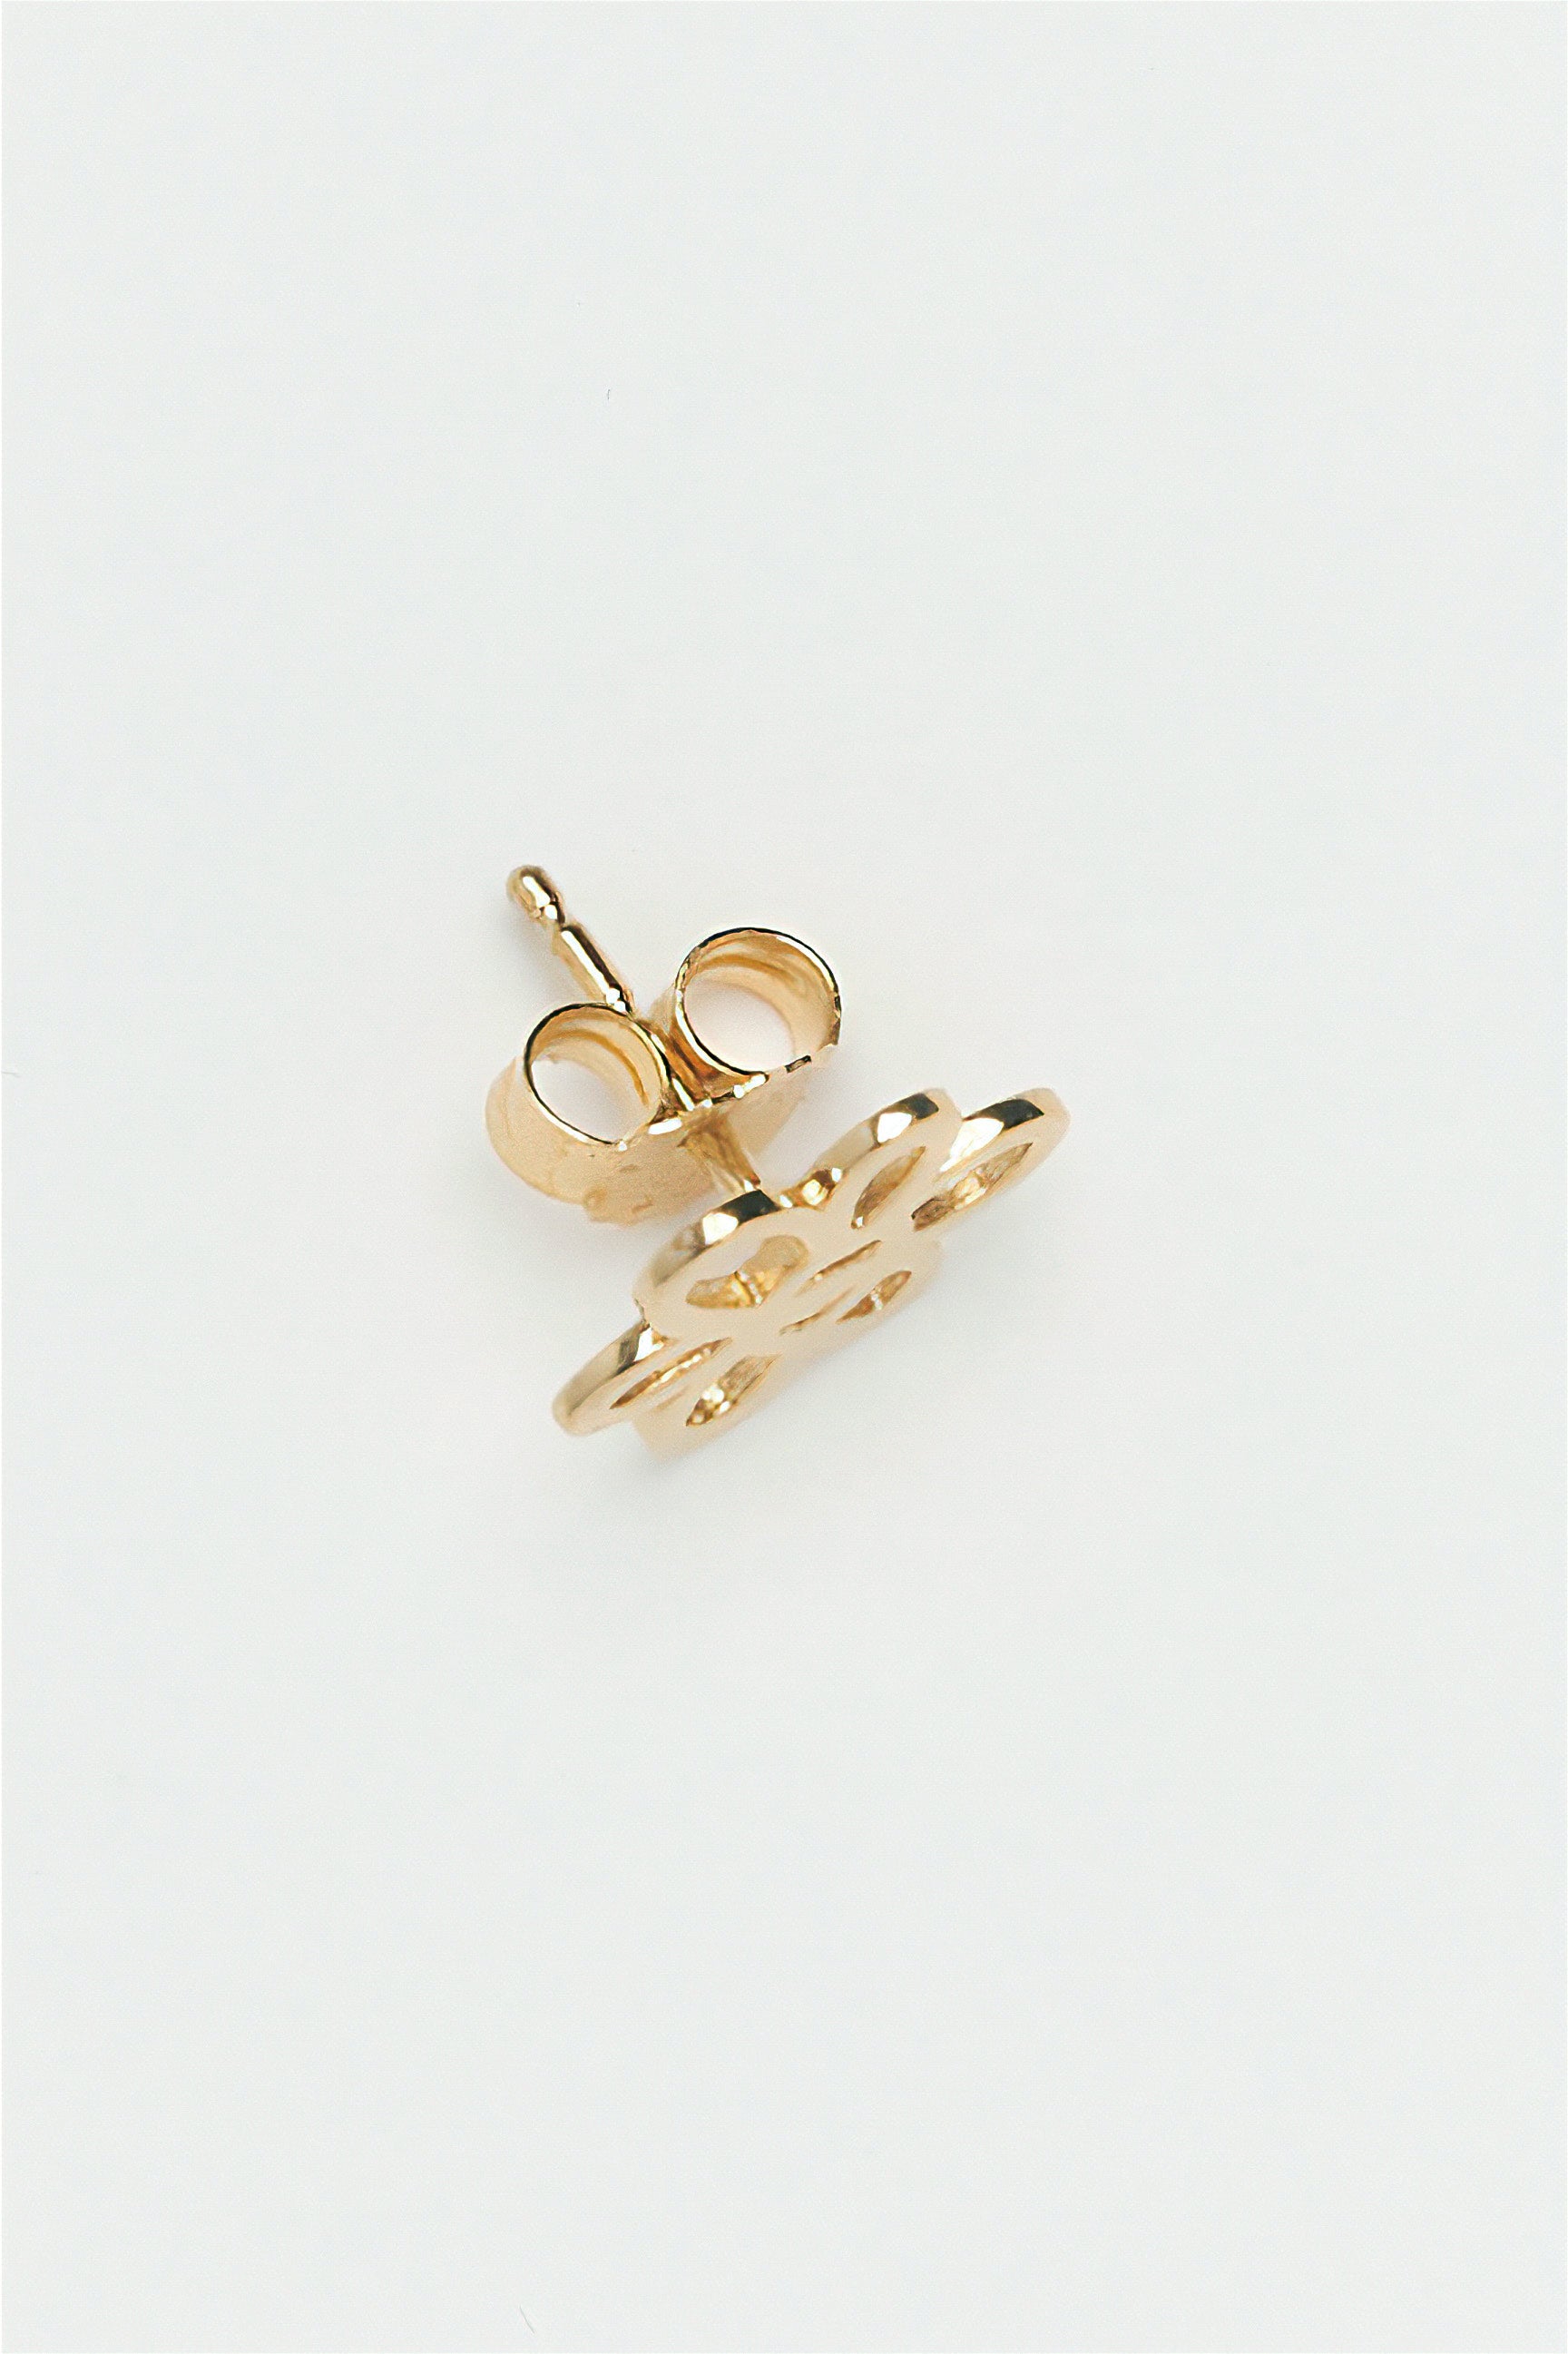 The GATEWAY FRAME GOLD GESTURE STUD EARRING  available online with global shipping, and in PAM Stores Melbourne and Sydney.